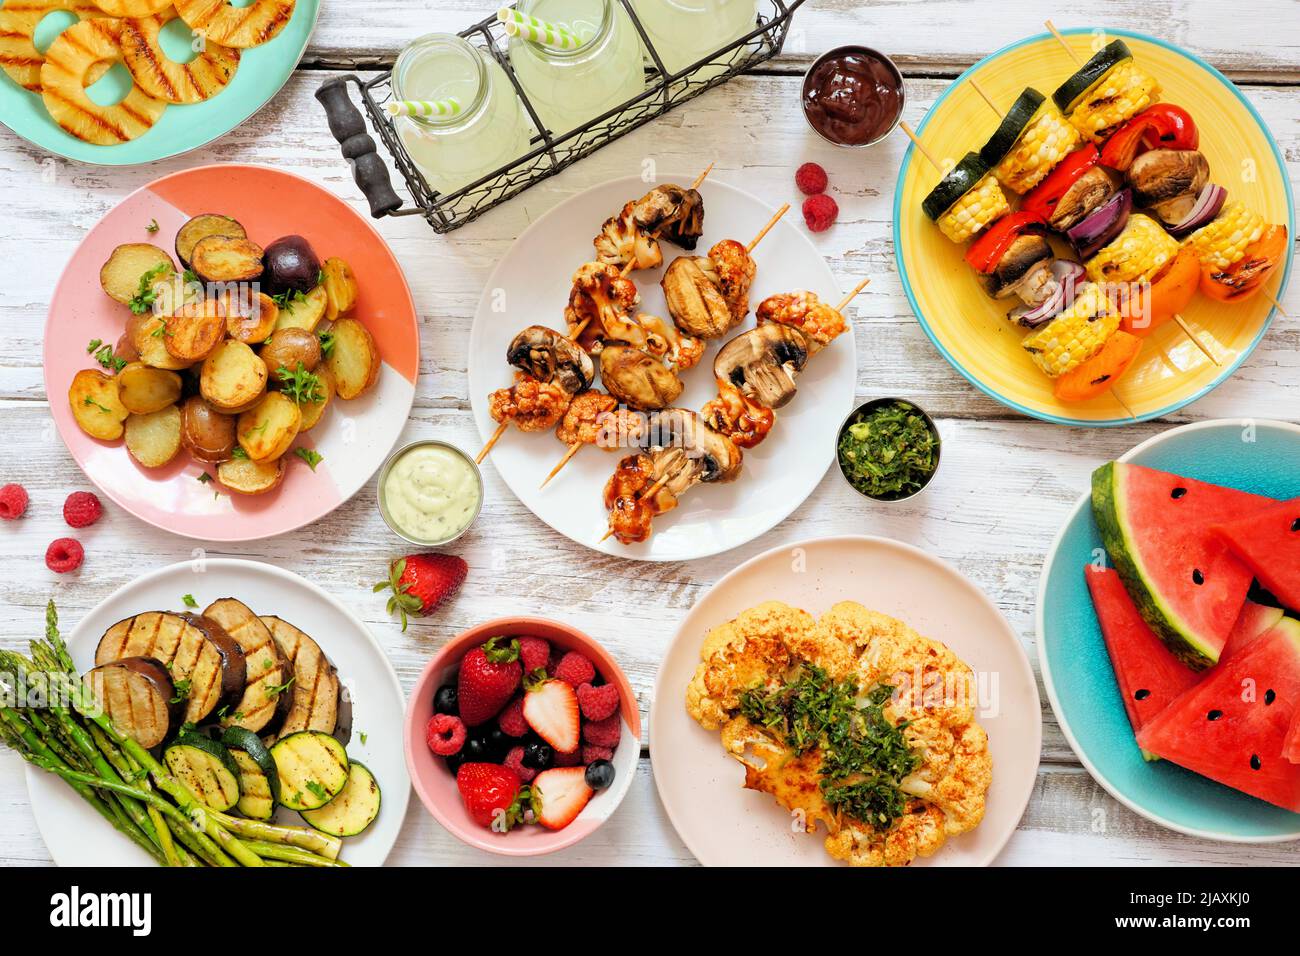 Vegan summer bbq or picnic table scene. Overhead view on a white wood background. Fruit, grilled vegetables, skewers, cauliflower steak and lemonade. Stock Photo